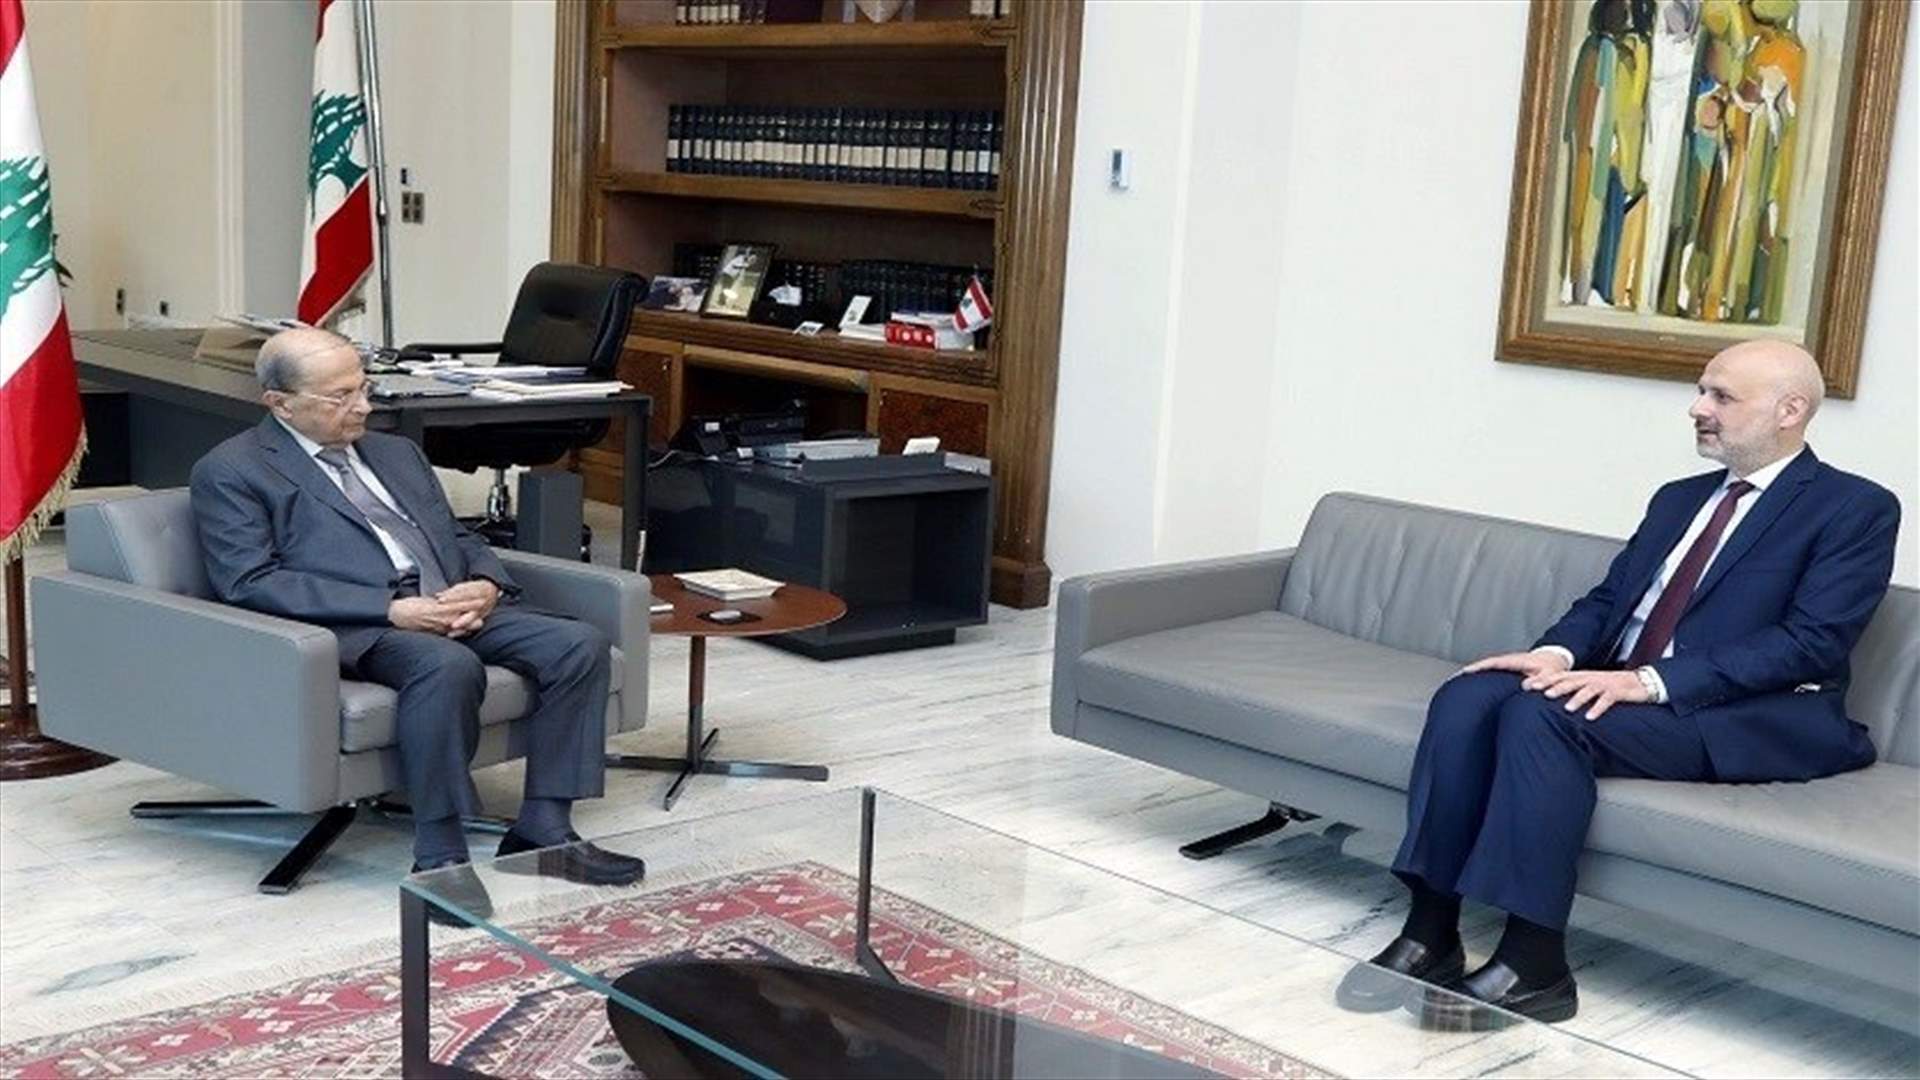 President Aoun meets with Mawlawi over parliamentary elections preparations